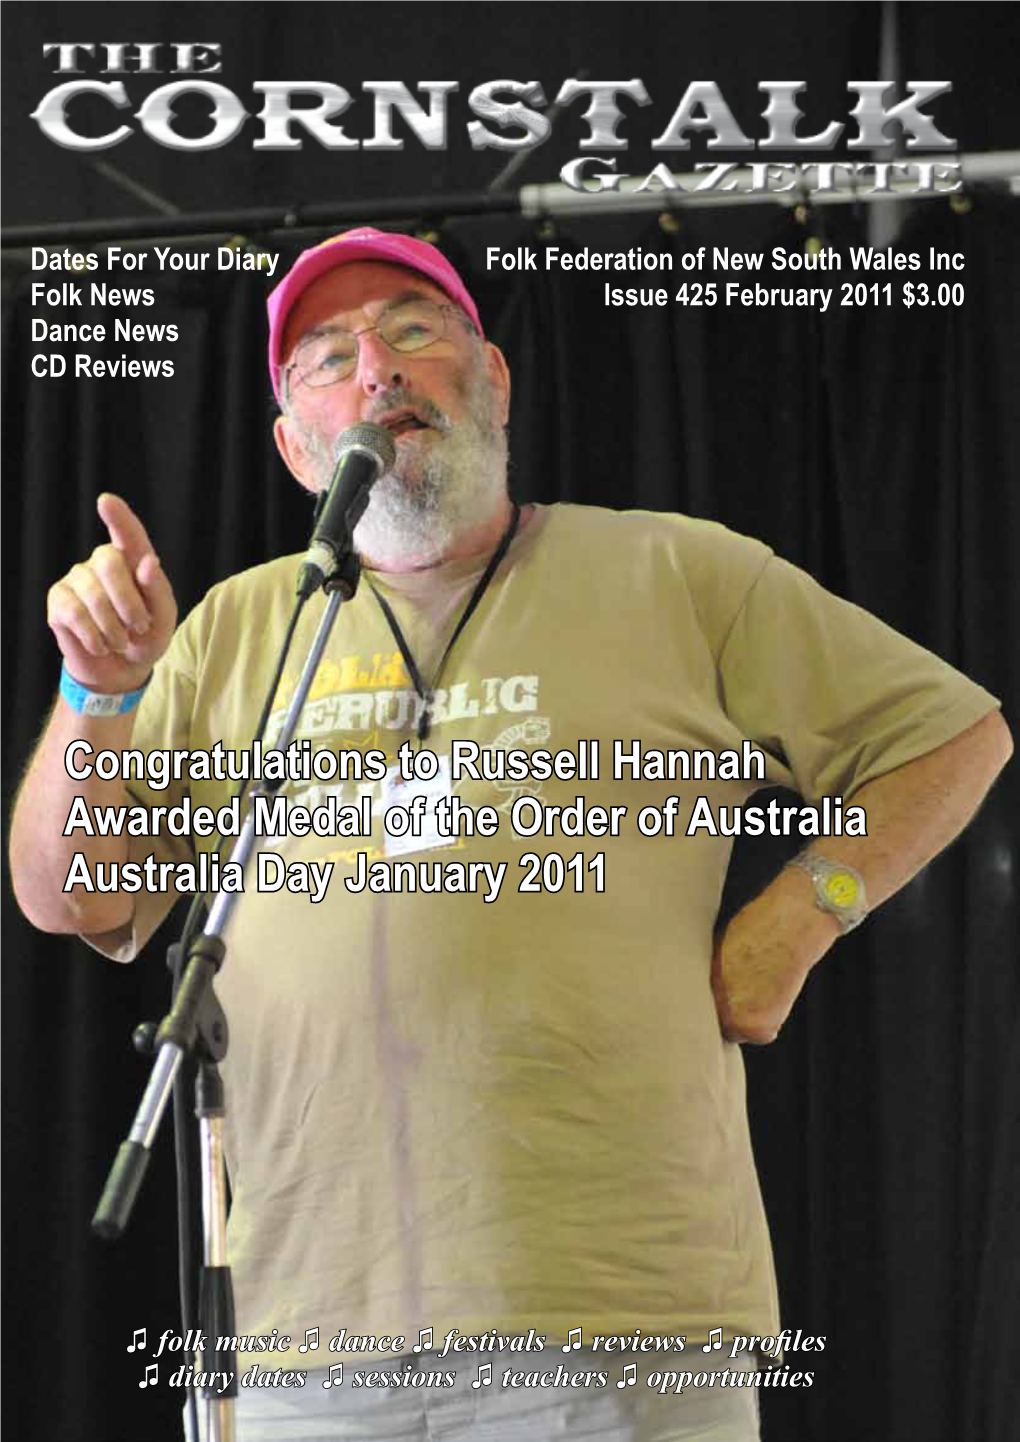 Congratulations to Russell Hannah Awarded Medal of the Order of Australia Australia Day January 2011